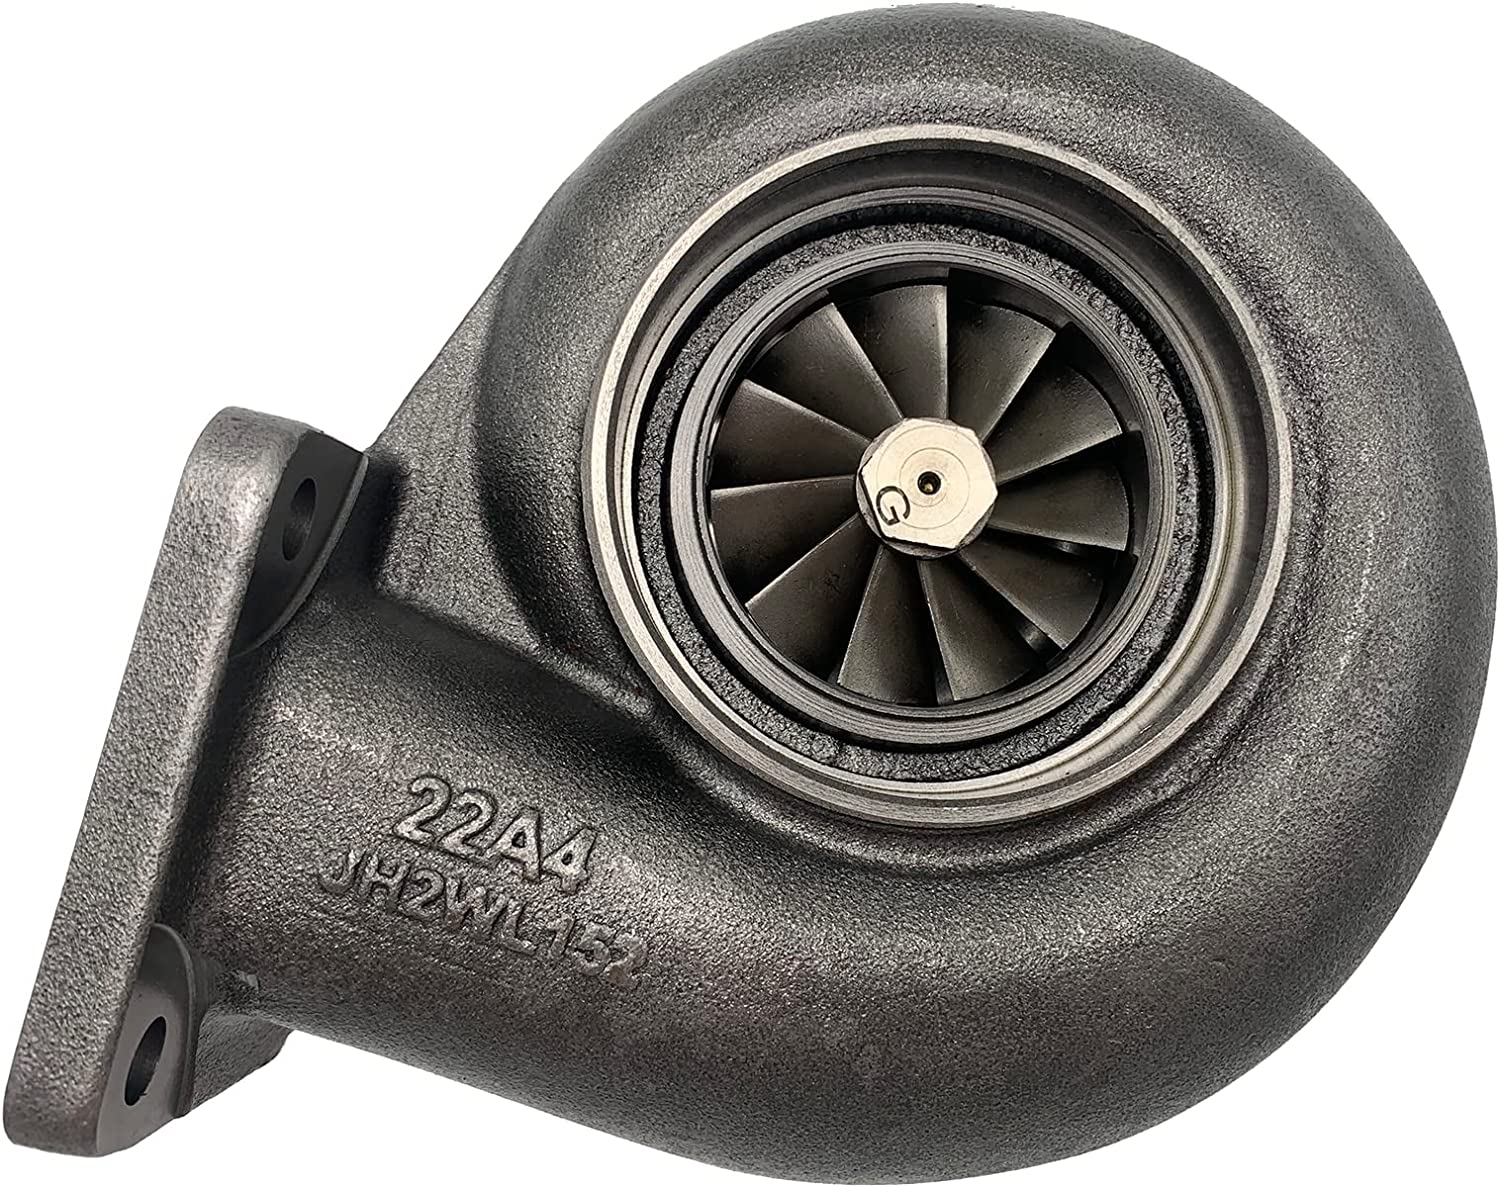 Seapple Turbocharger 4N6859 4N-6859 Compatible with Caterpillar D4E 950 930 518 Skidder 3304 - image 4 of 6